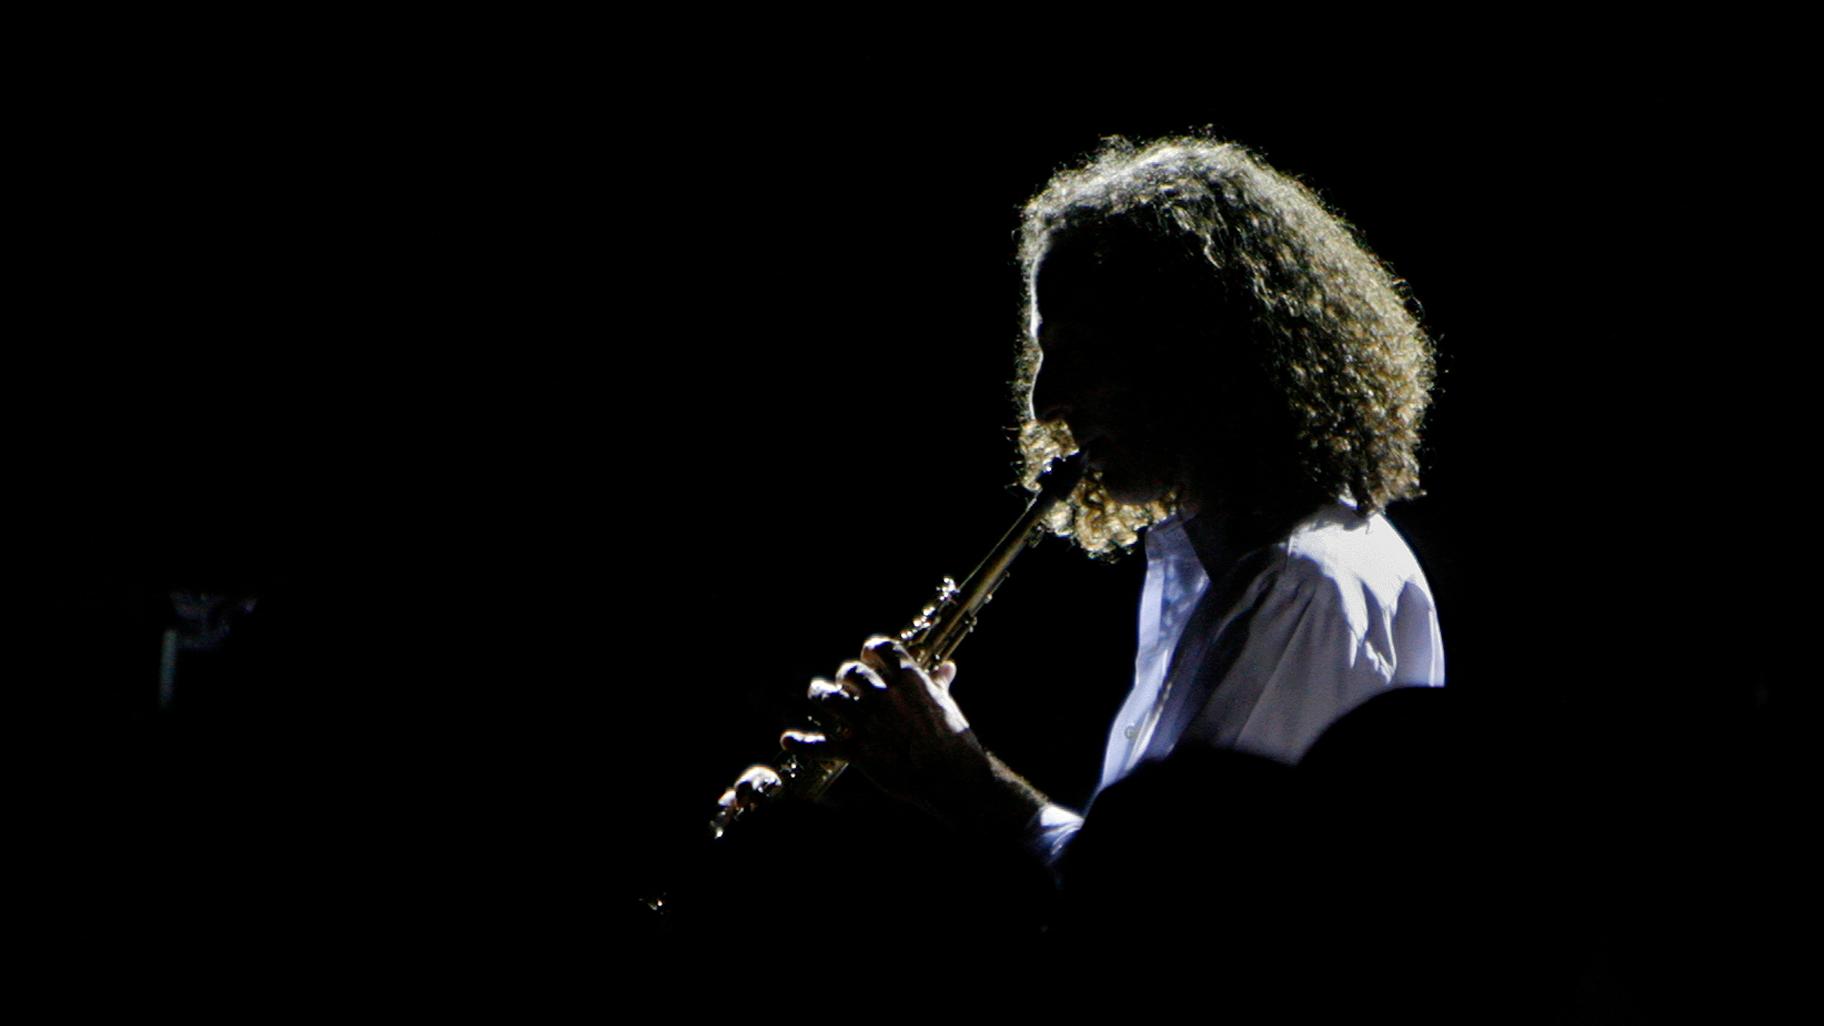 US jazz musician and saxophonist Kenneth Gorelick, also know as Kenny G, performs during a concert in Hong Kong as part of his "Rhythm and Romance" world tour in 2008.